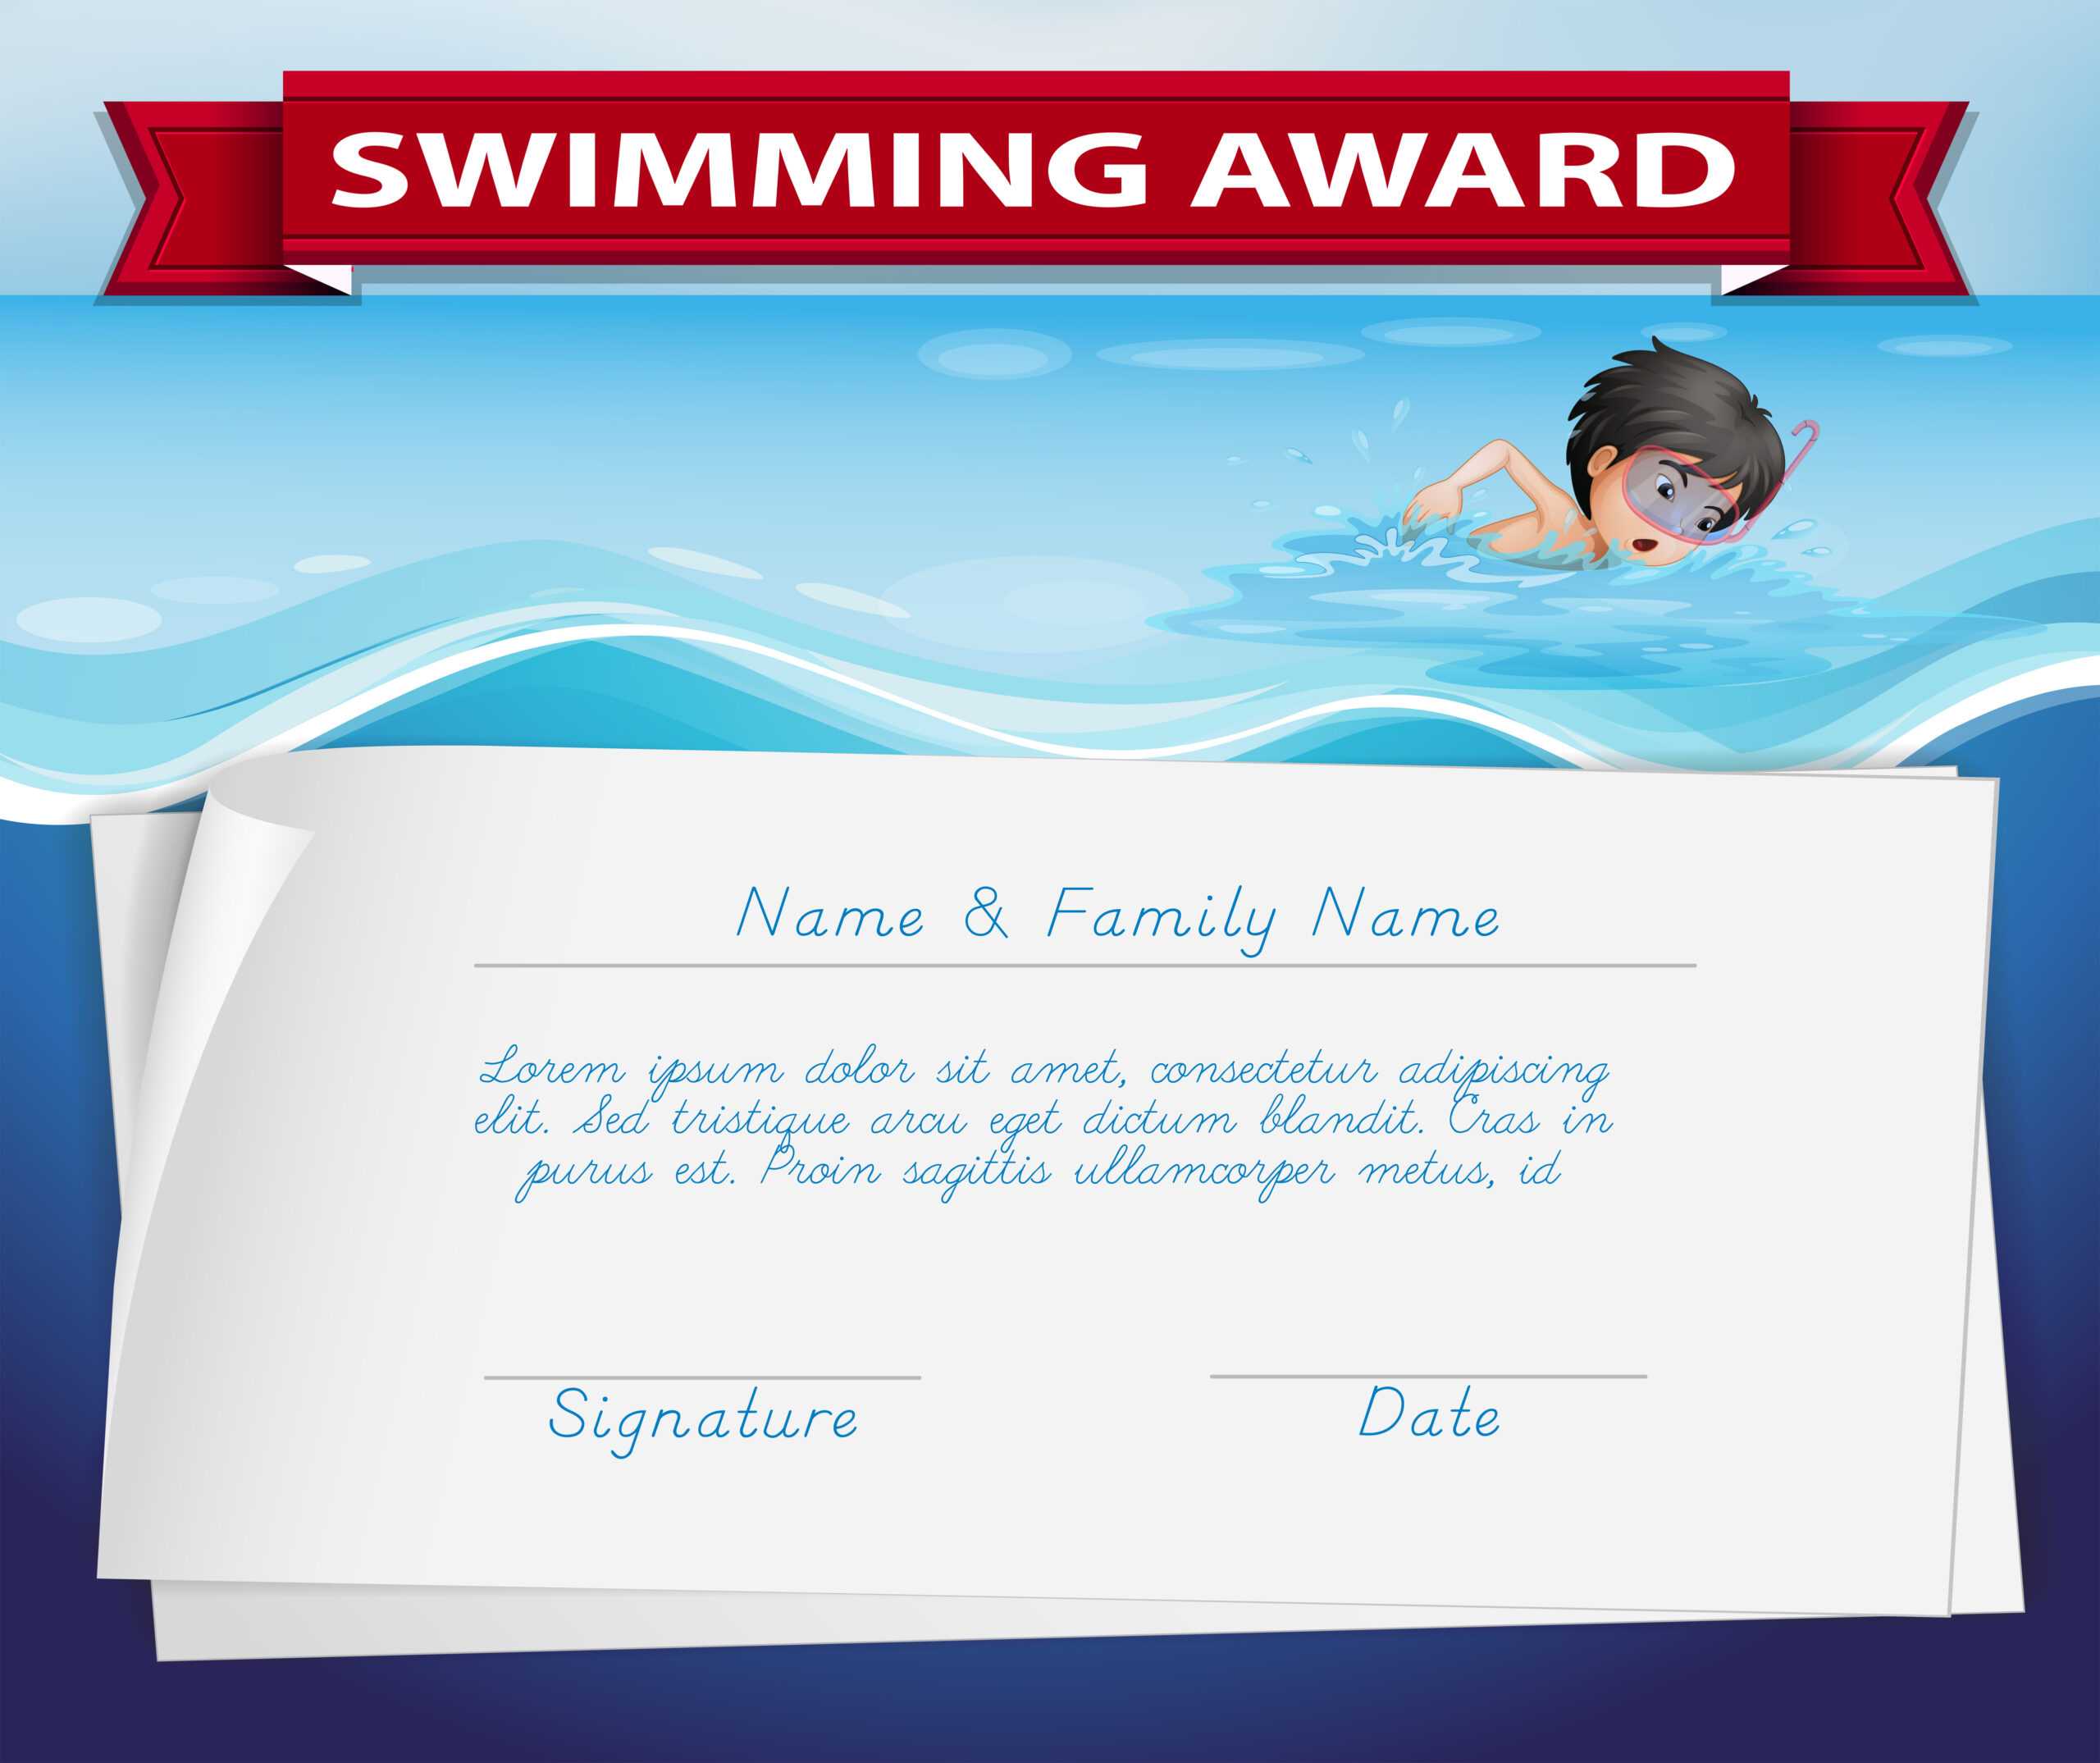 Template Of Certificate For Swimming Award – Download Free Throughout Free Swimming Certificate Templates